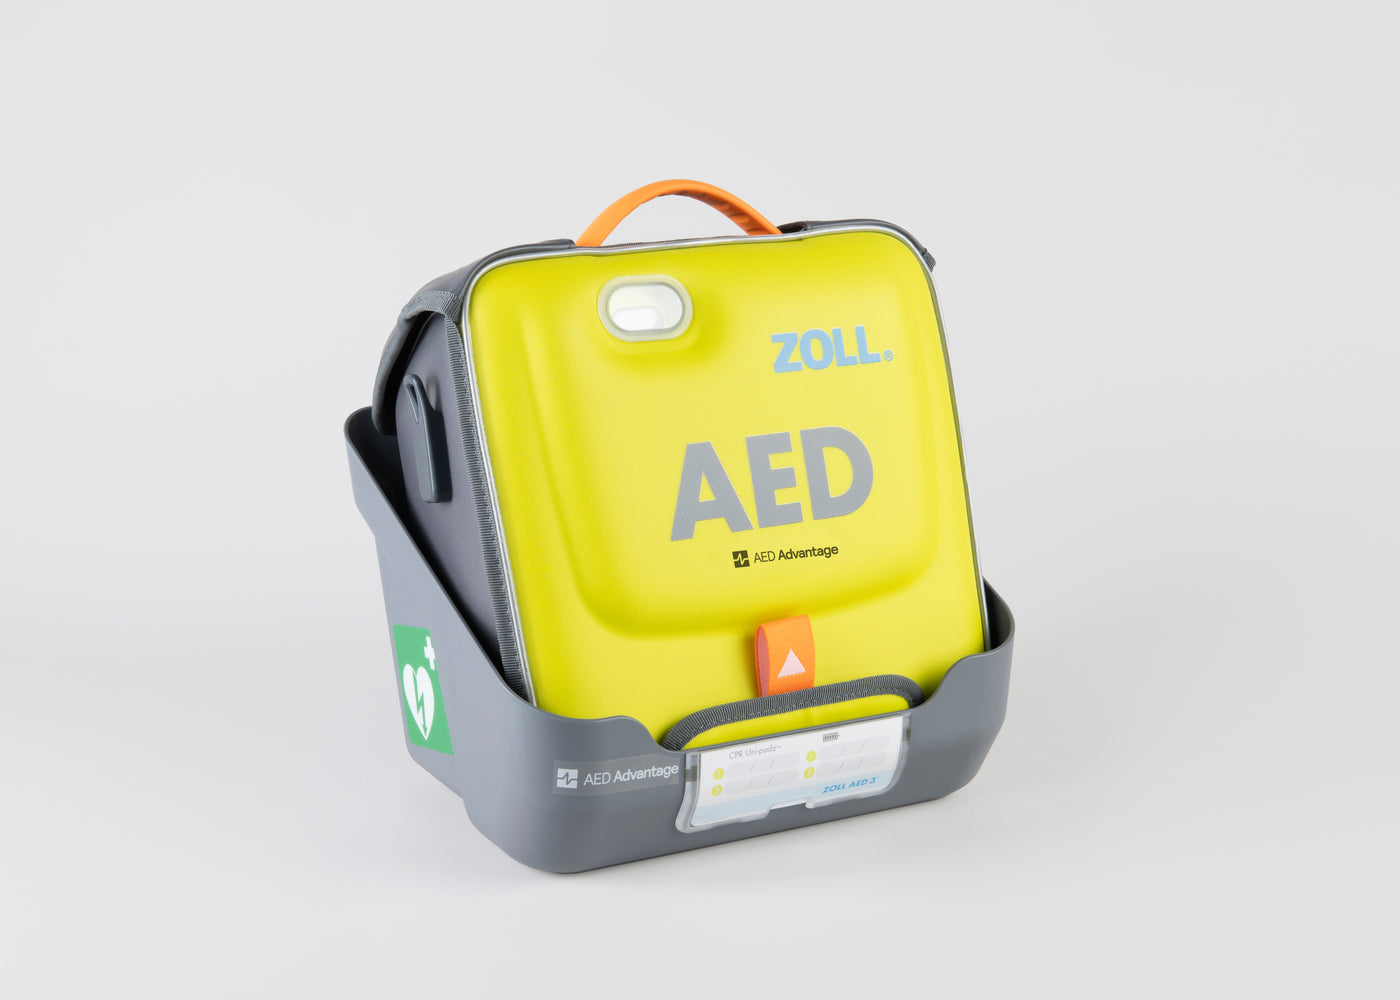 A gray wall mount bracket holding a bright green ZOLL AED 3